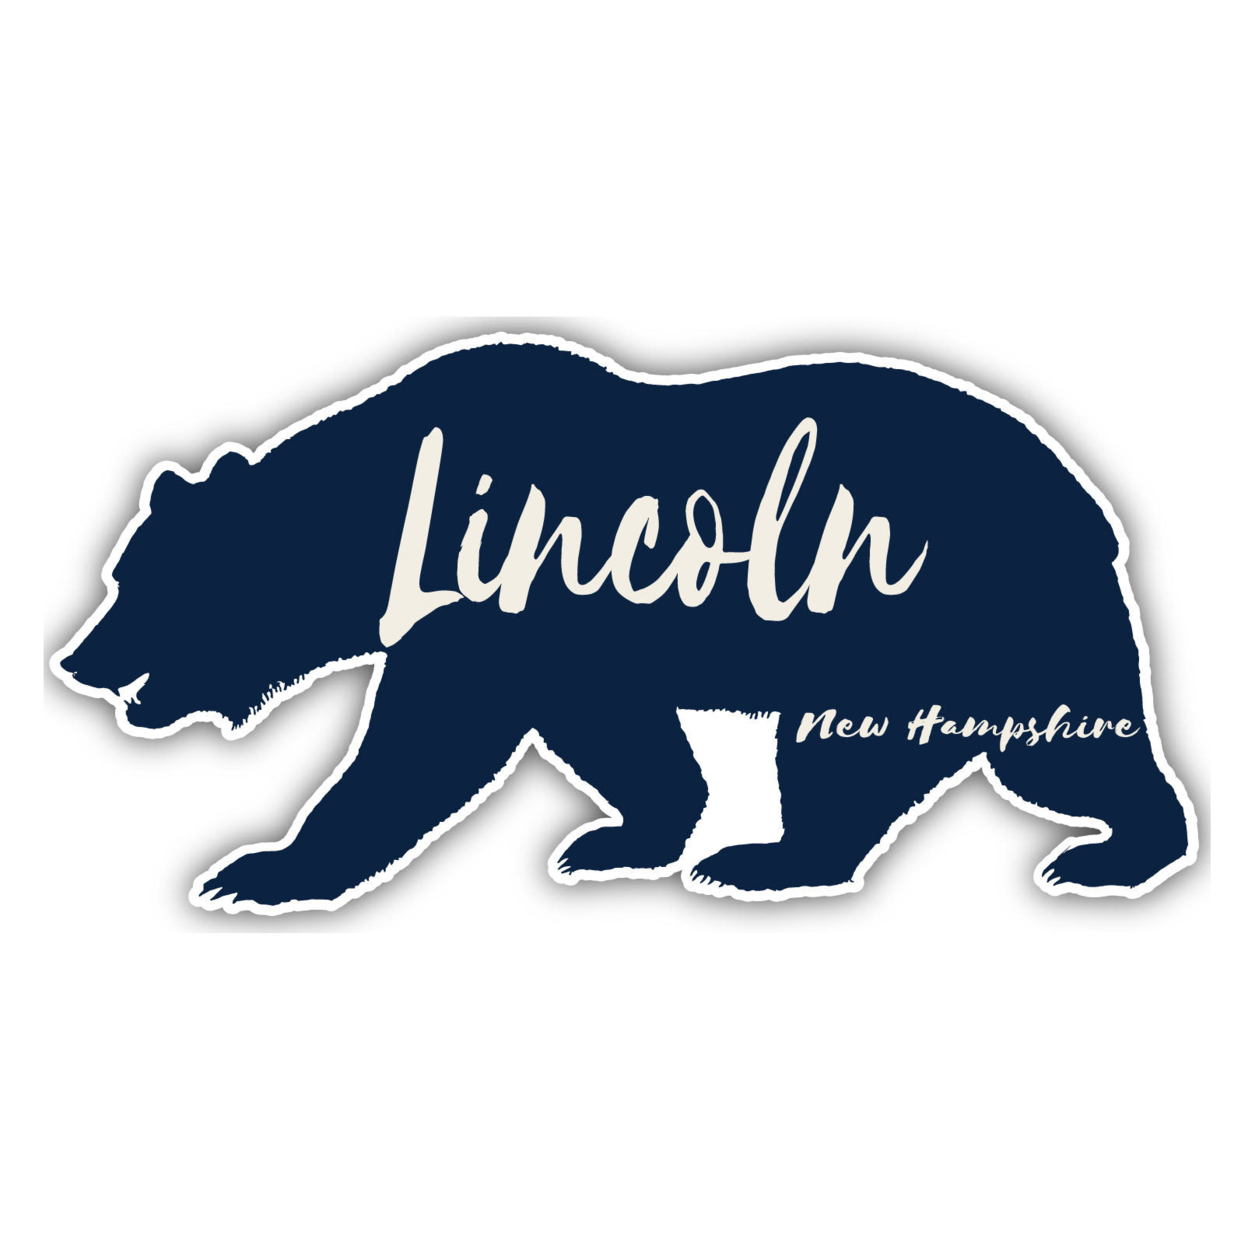 Lincoln New Hampshire Souvenir Decorative Stickers (Choose Theme And Size) - 2-Inch, Adventures Awaits